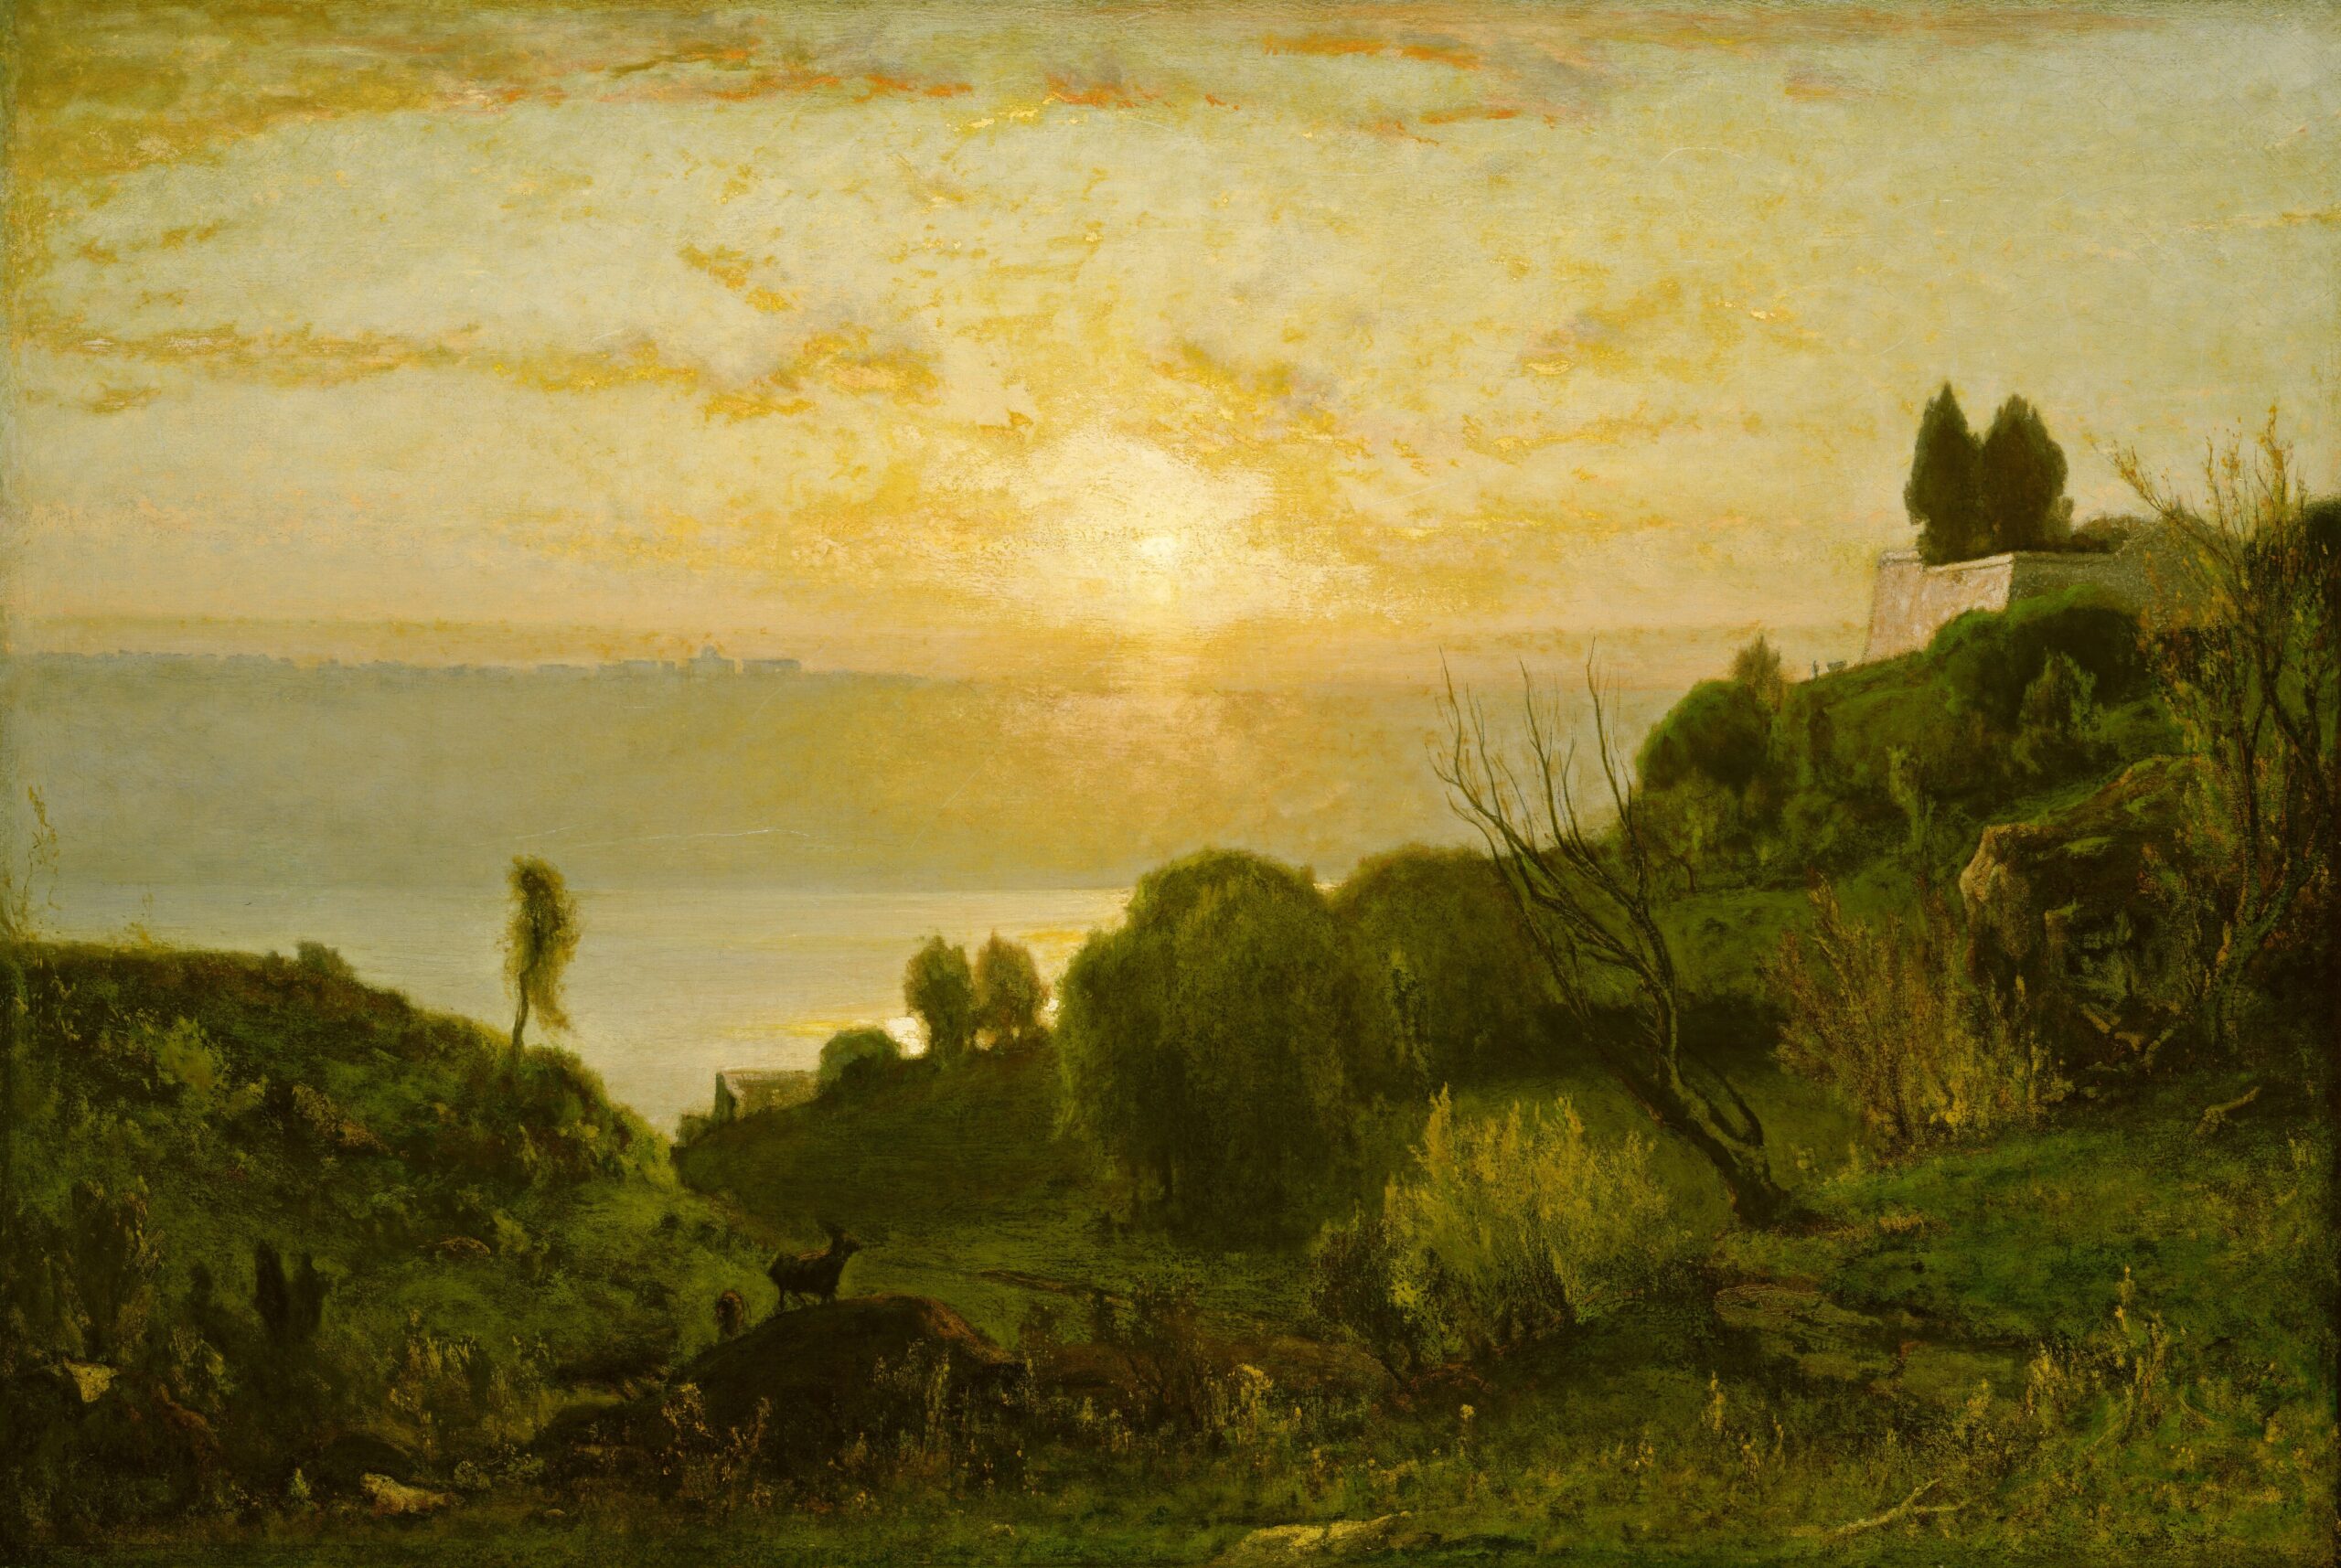 "Lake Albano, Sunset" by George Inness